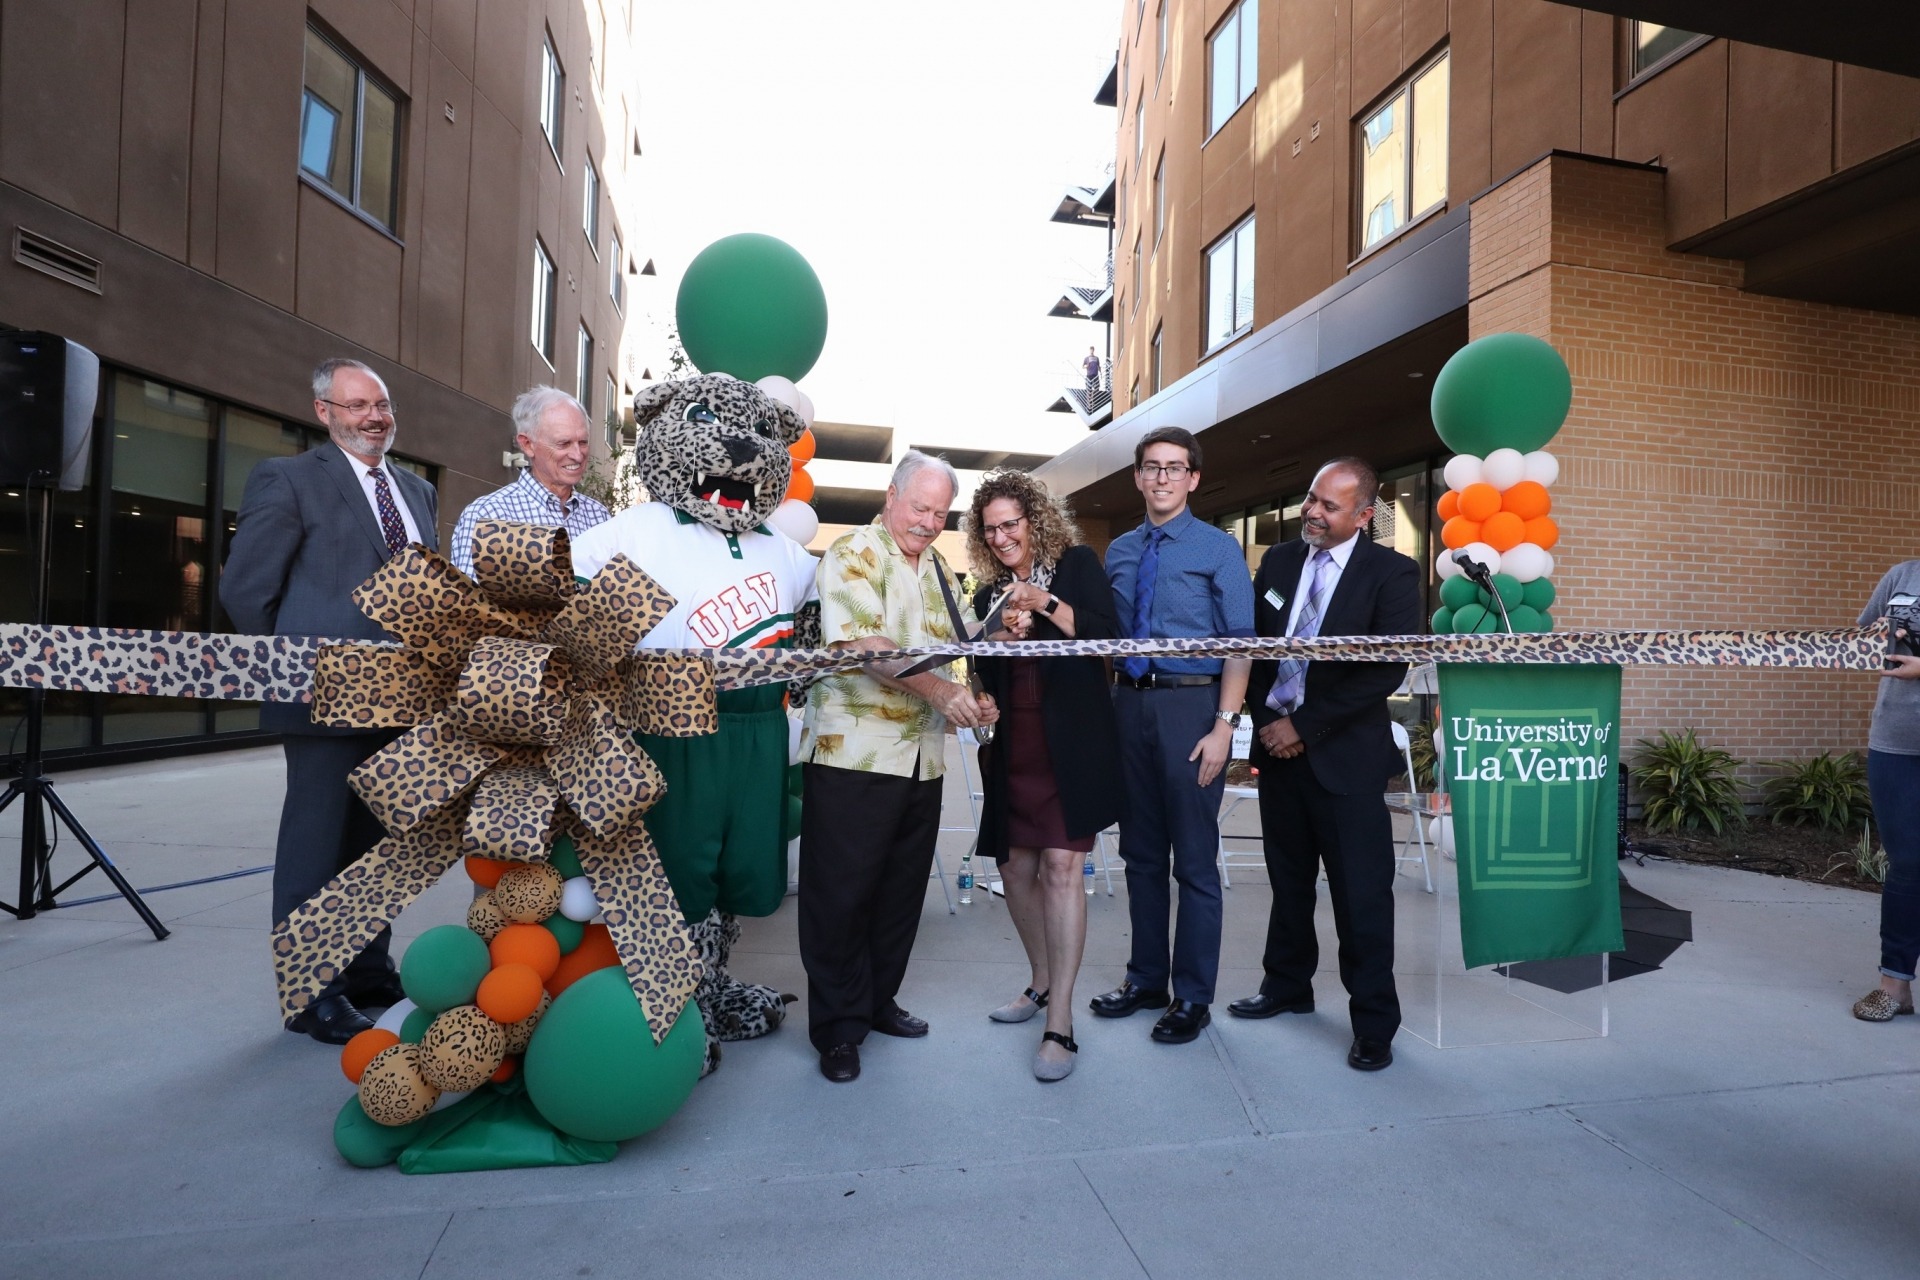 President Devorah Lieberman and La Verne Mayor Don Kendrick cut the ribbon at the grand opening celebration for Citrus Hall and The Spot at the University of La Verne.